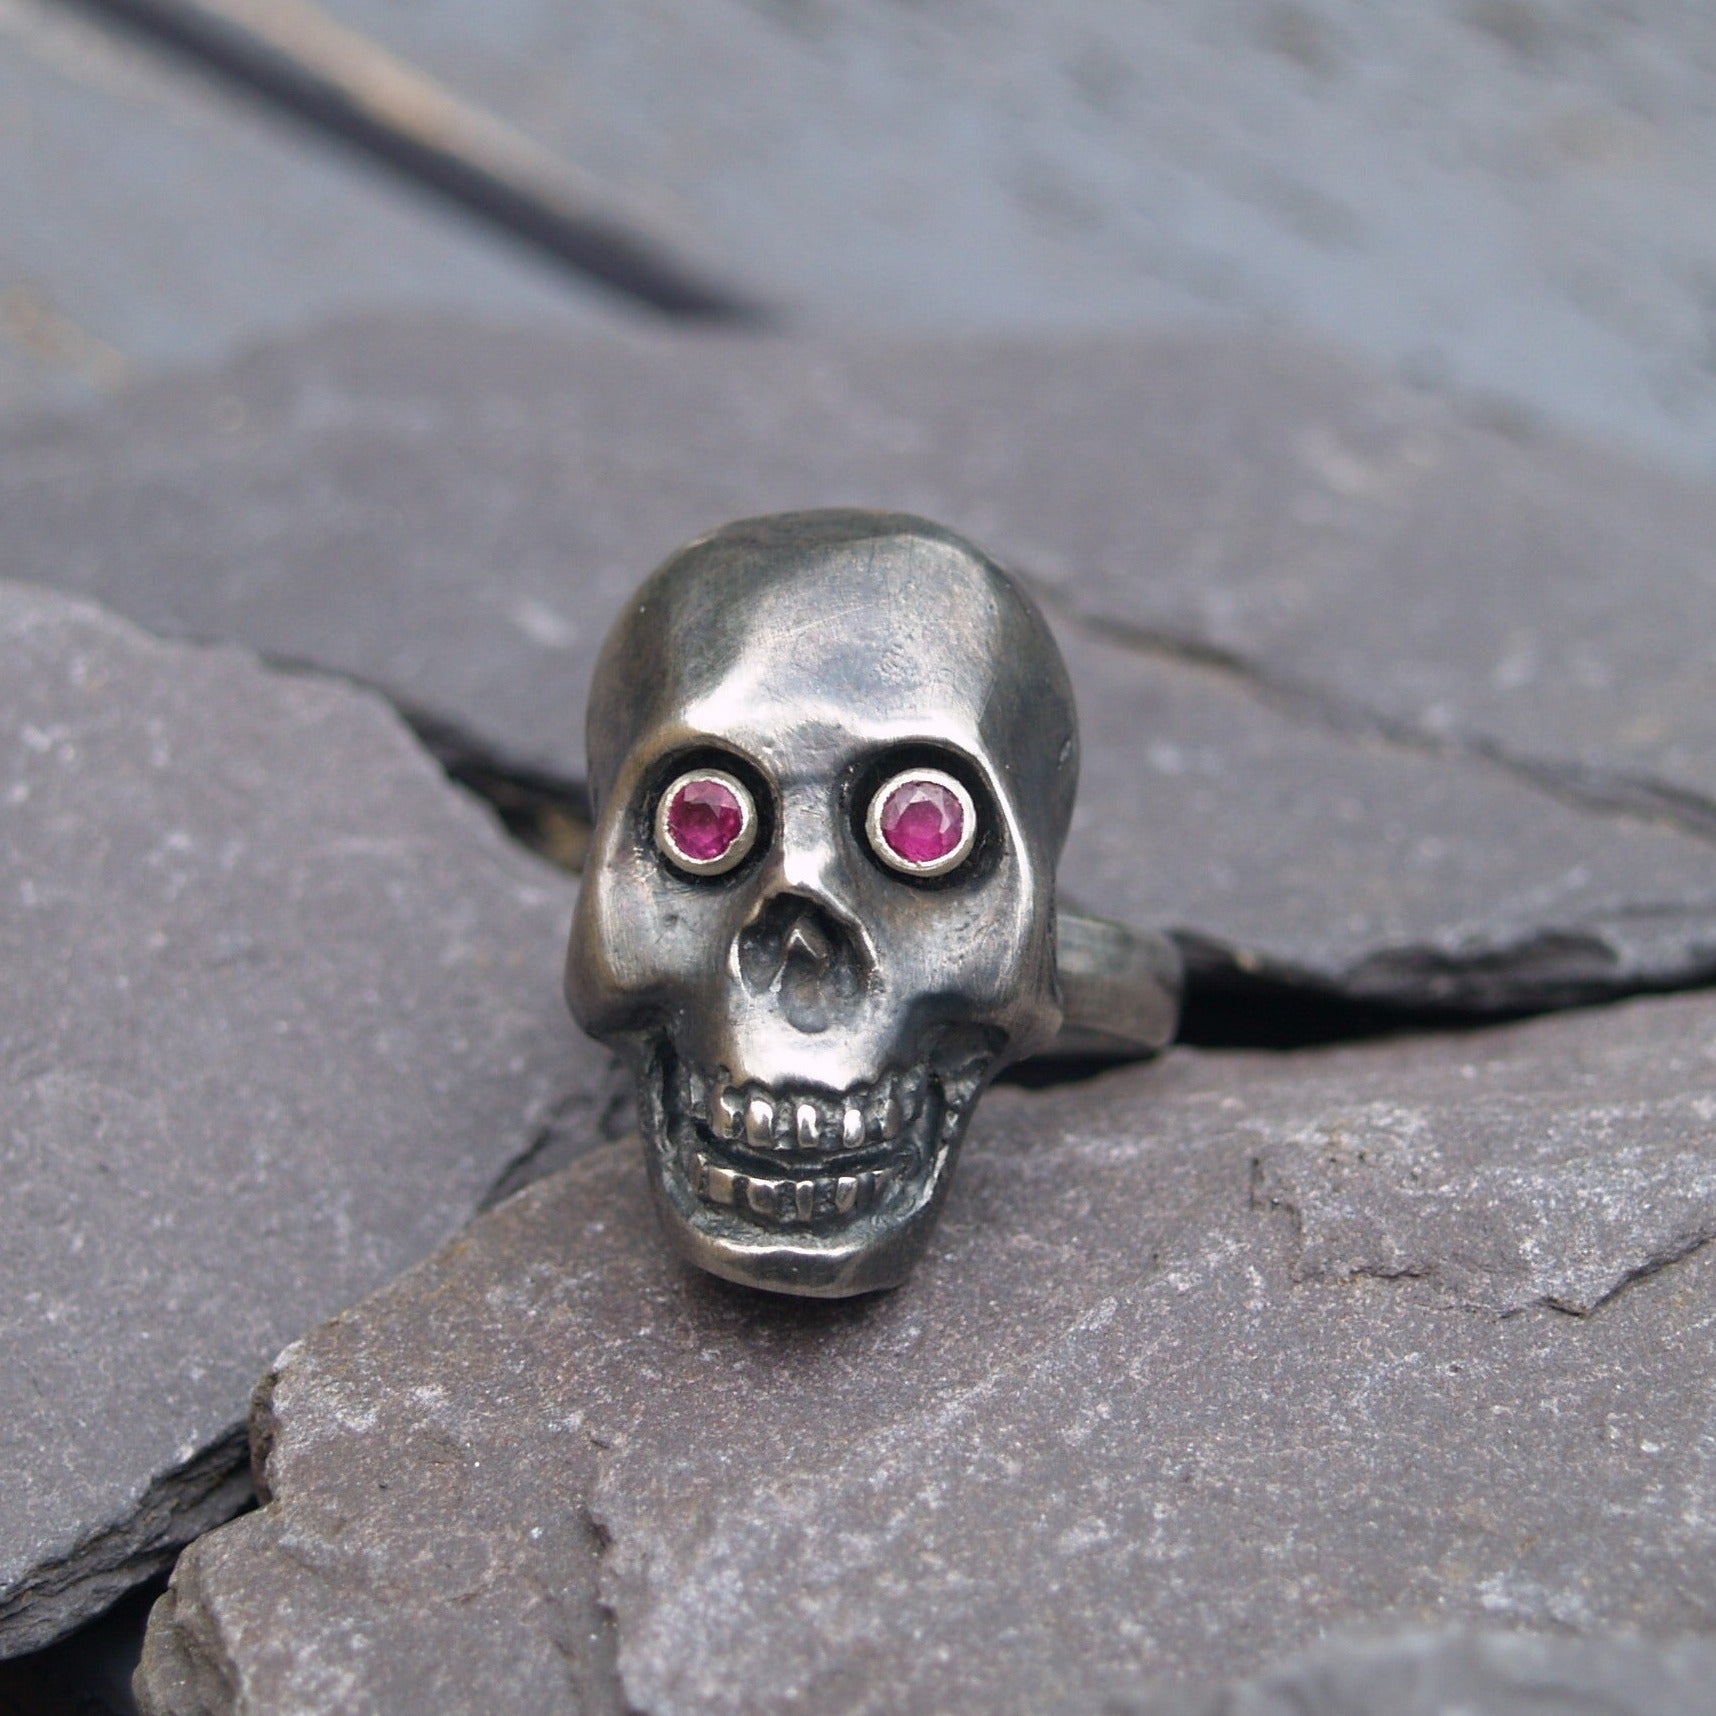 Contemporary Memento Mori Sterling Silver Skull Ring Size N or 6 3/4 USA.